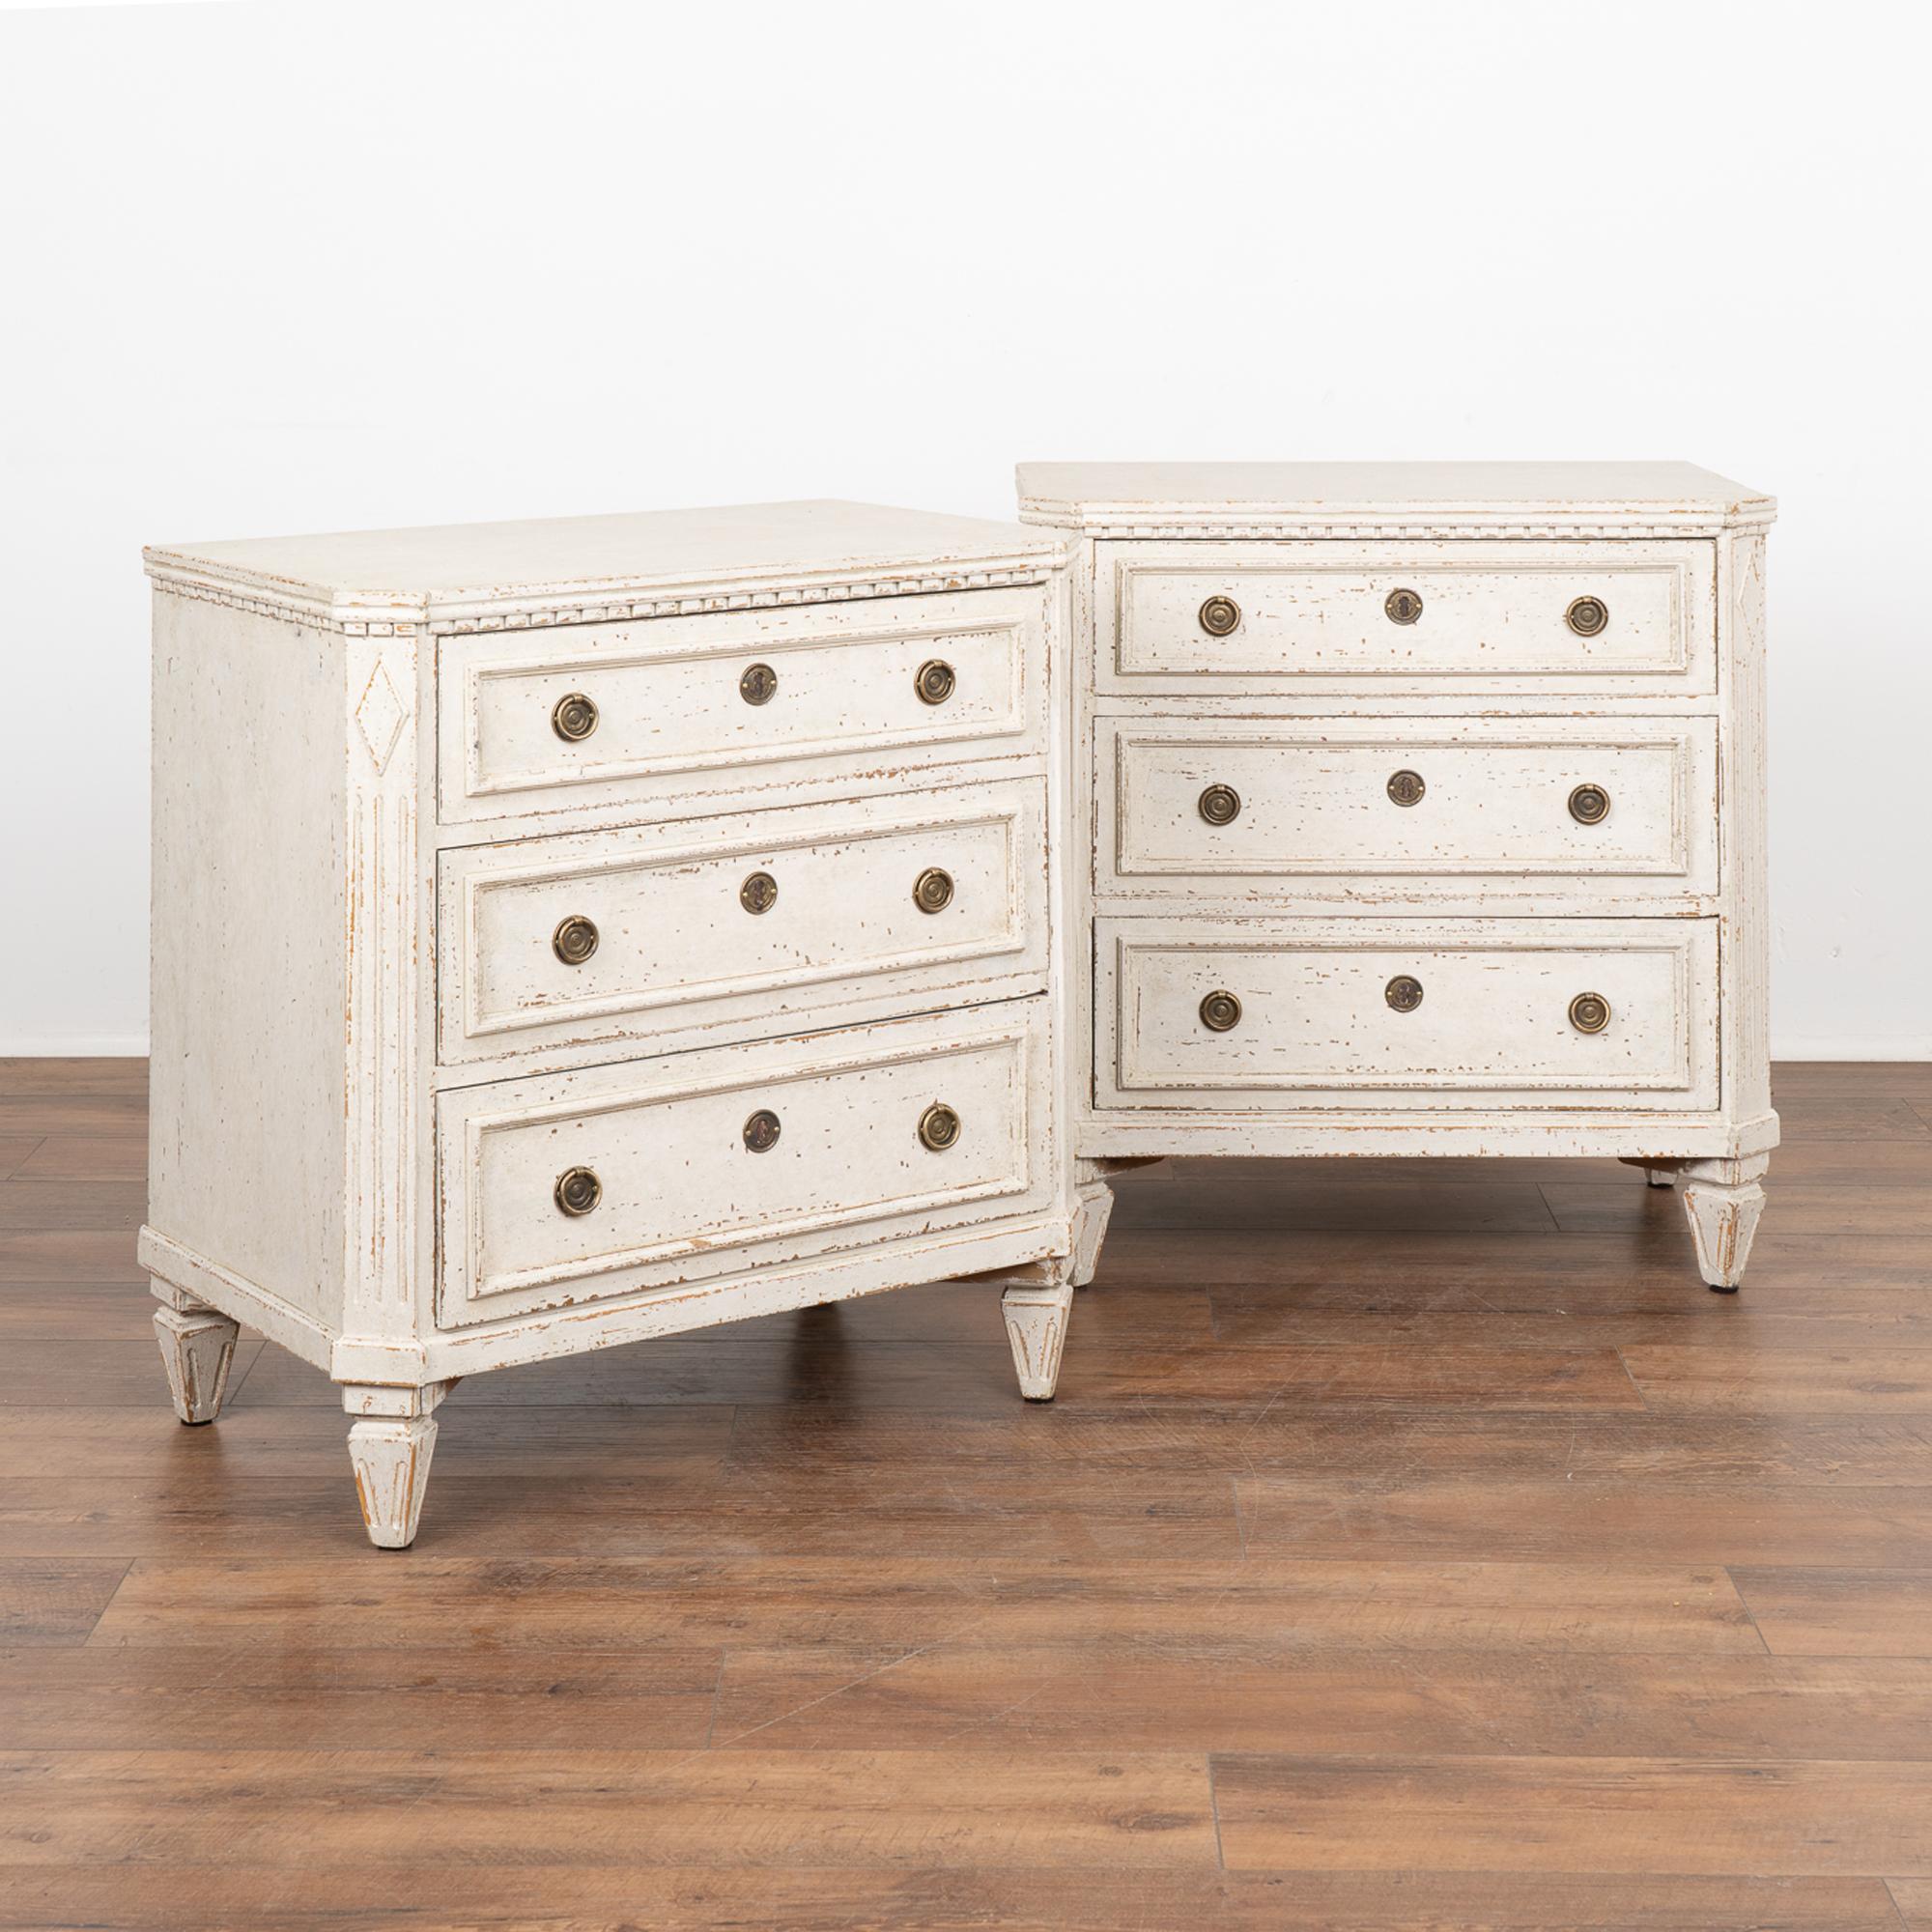 A pair of small Gustavian pine chest of drawers painted in shades of  white, fitting their Swedish origin.
Canted fluted side posts with upper carved diamond medallion, dentil molding, raised carved panels along the three drawers, all setting on